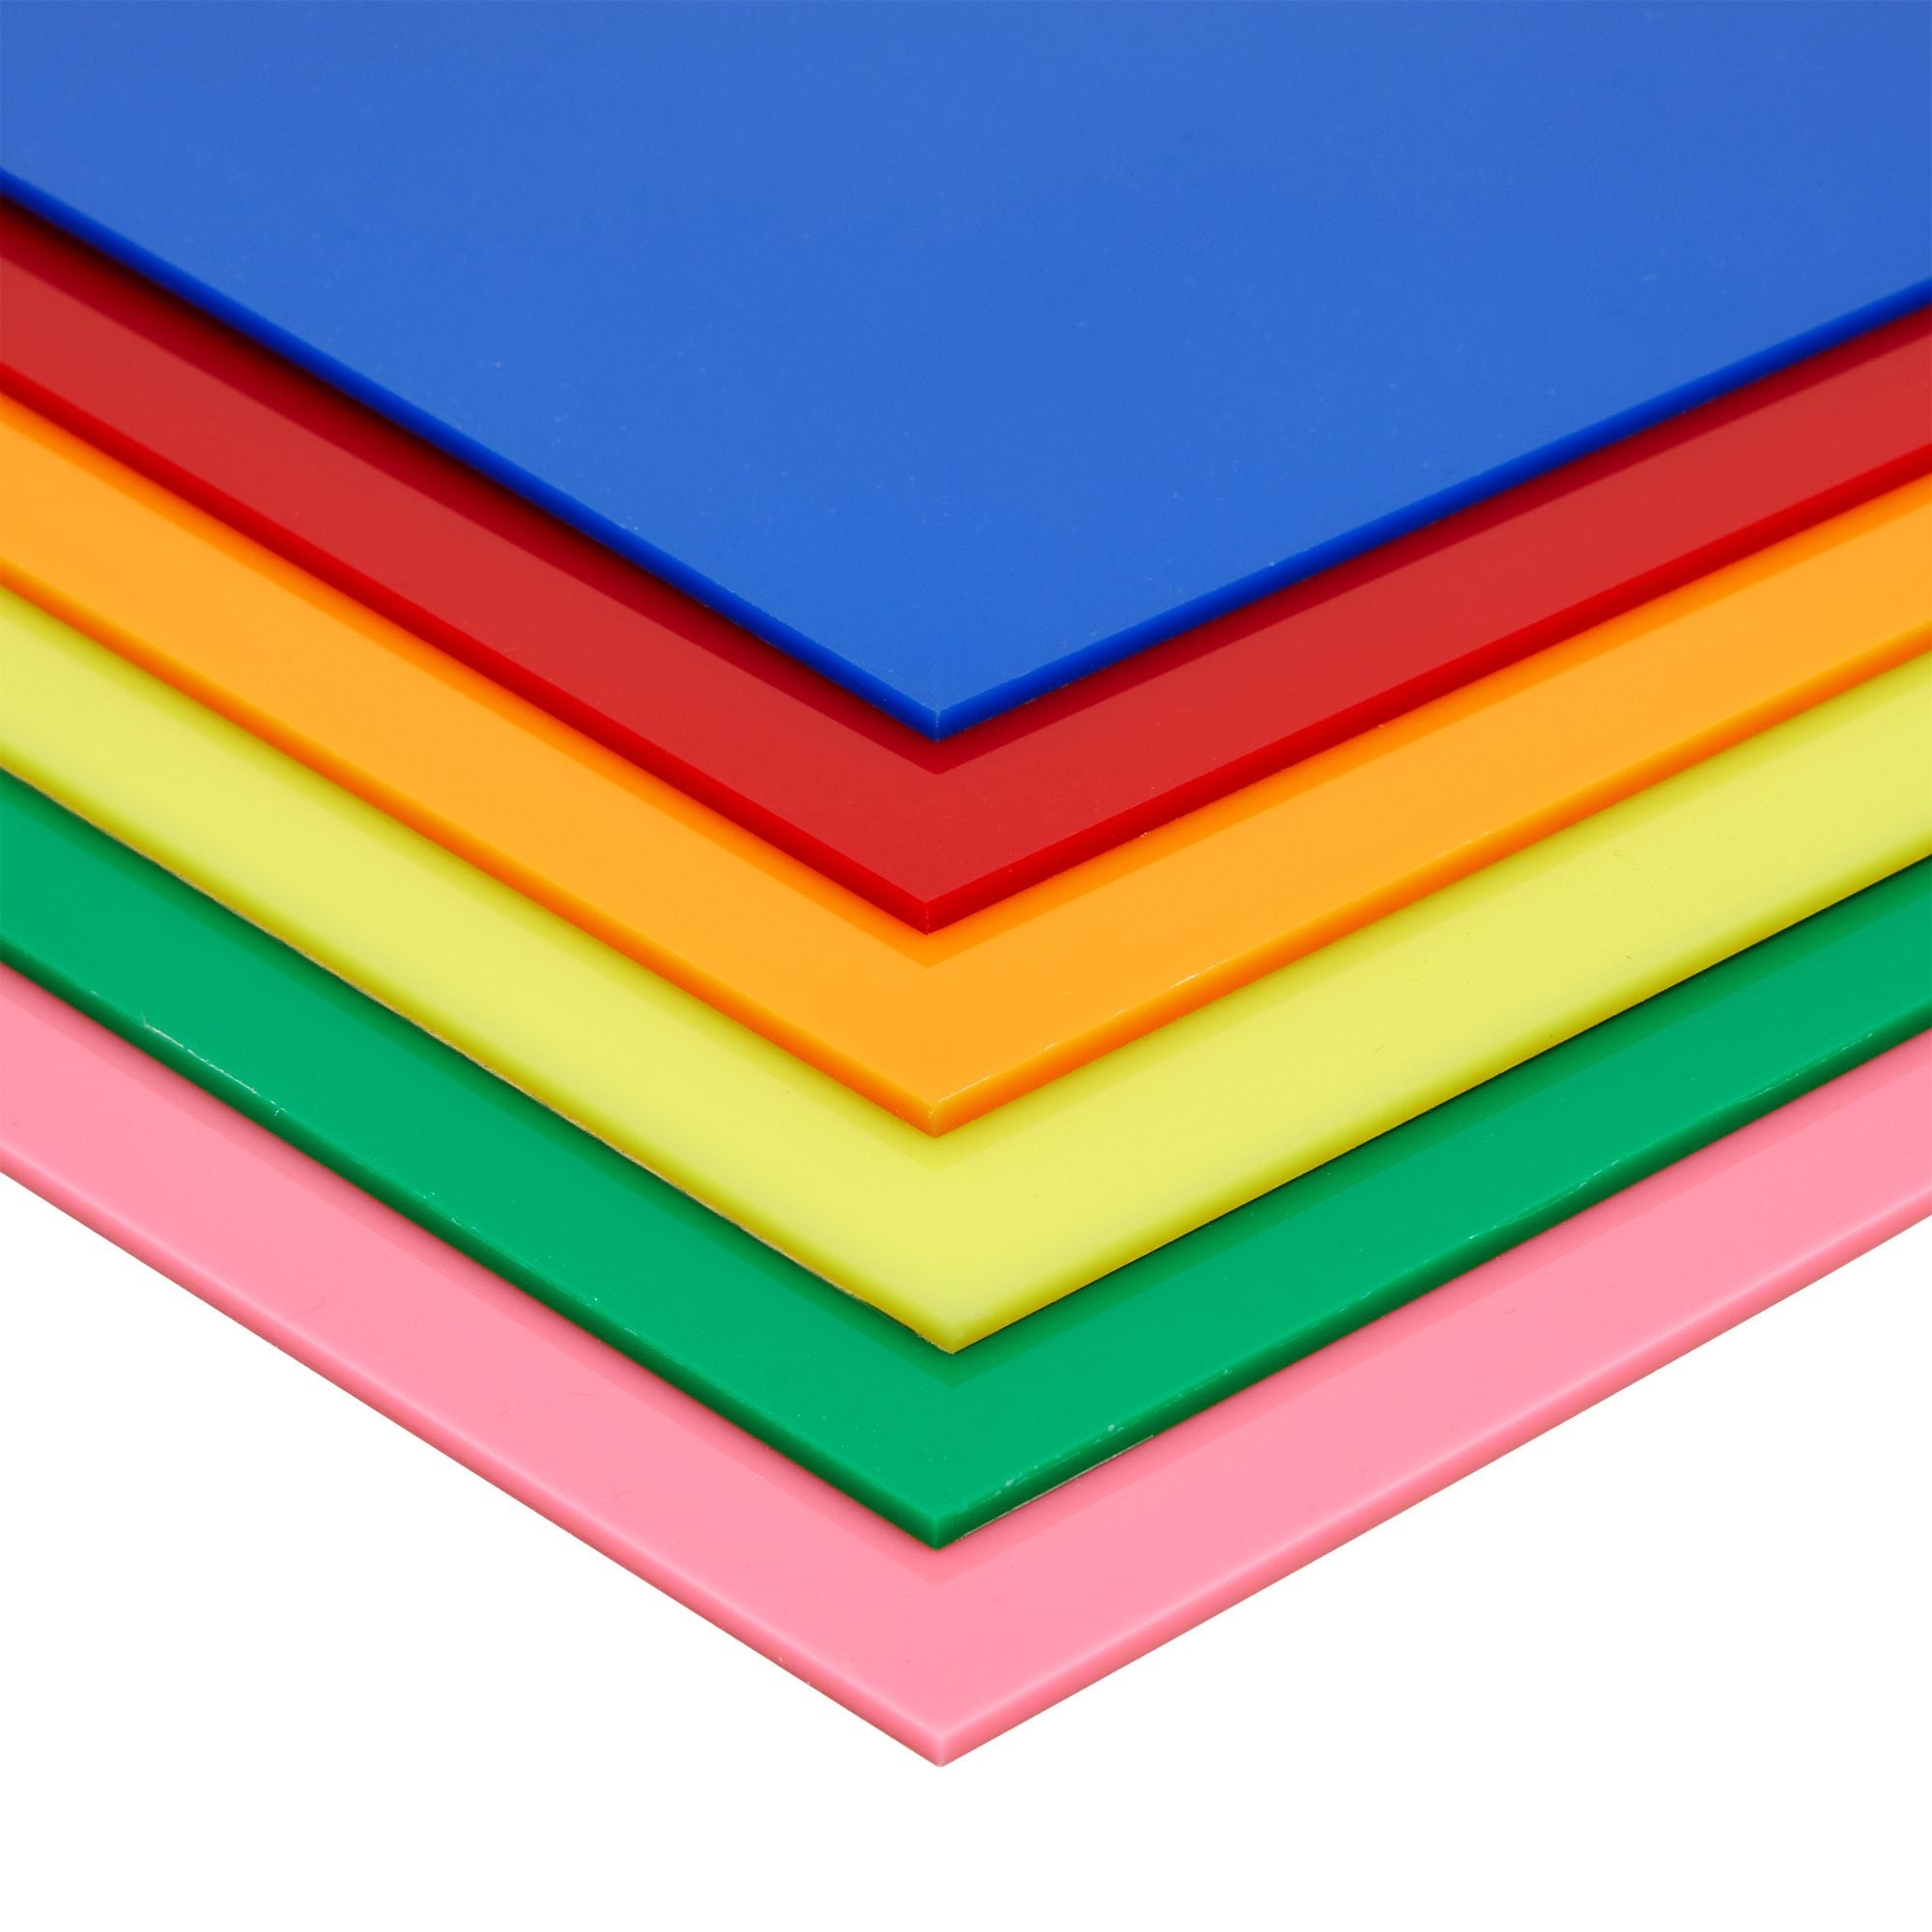 6 Pack Colored Acrylic Sheets for Crafts 11.75 x 11.75 - Square